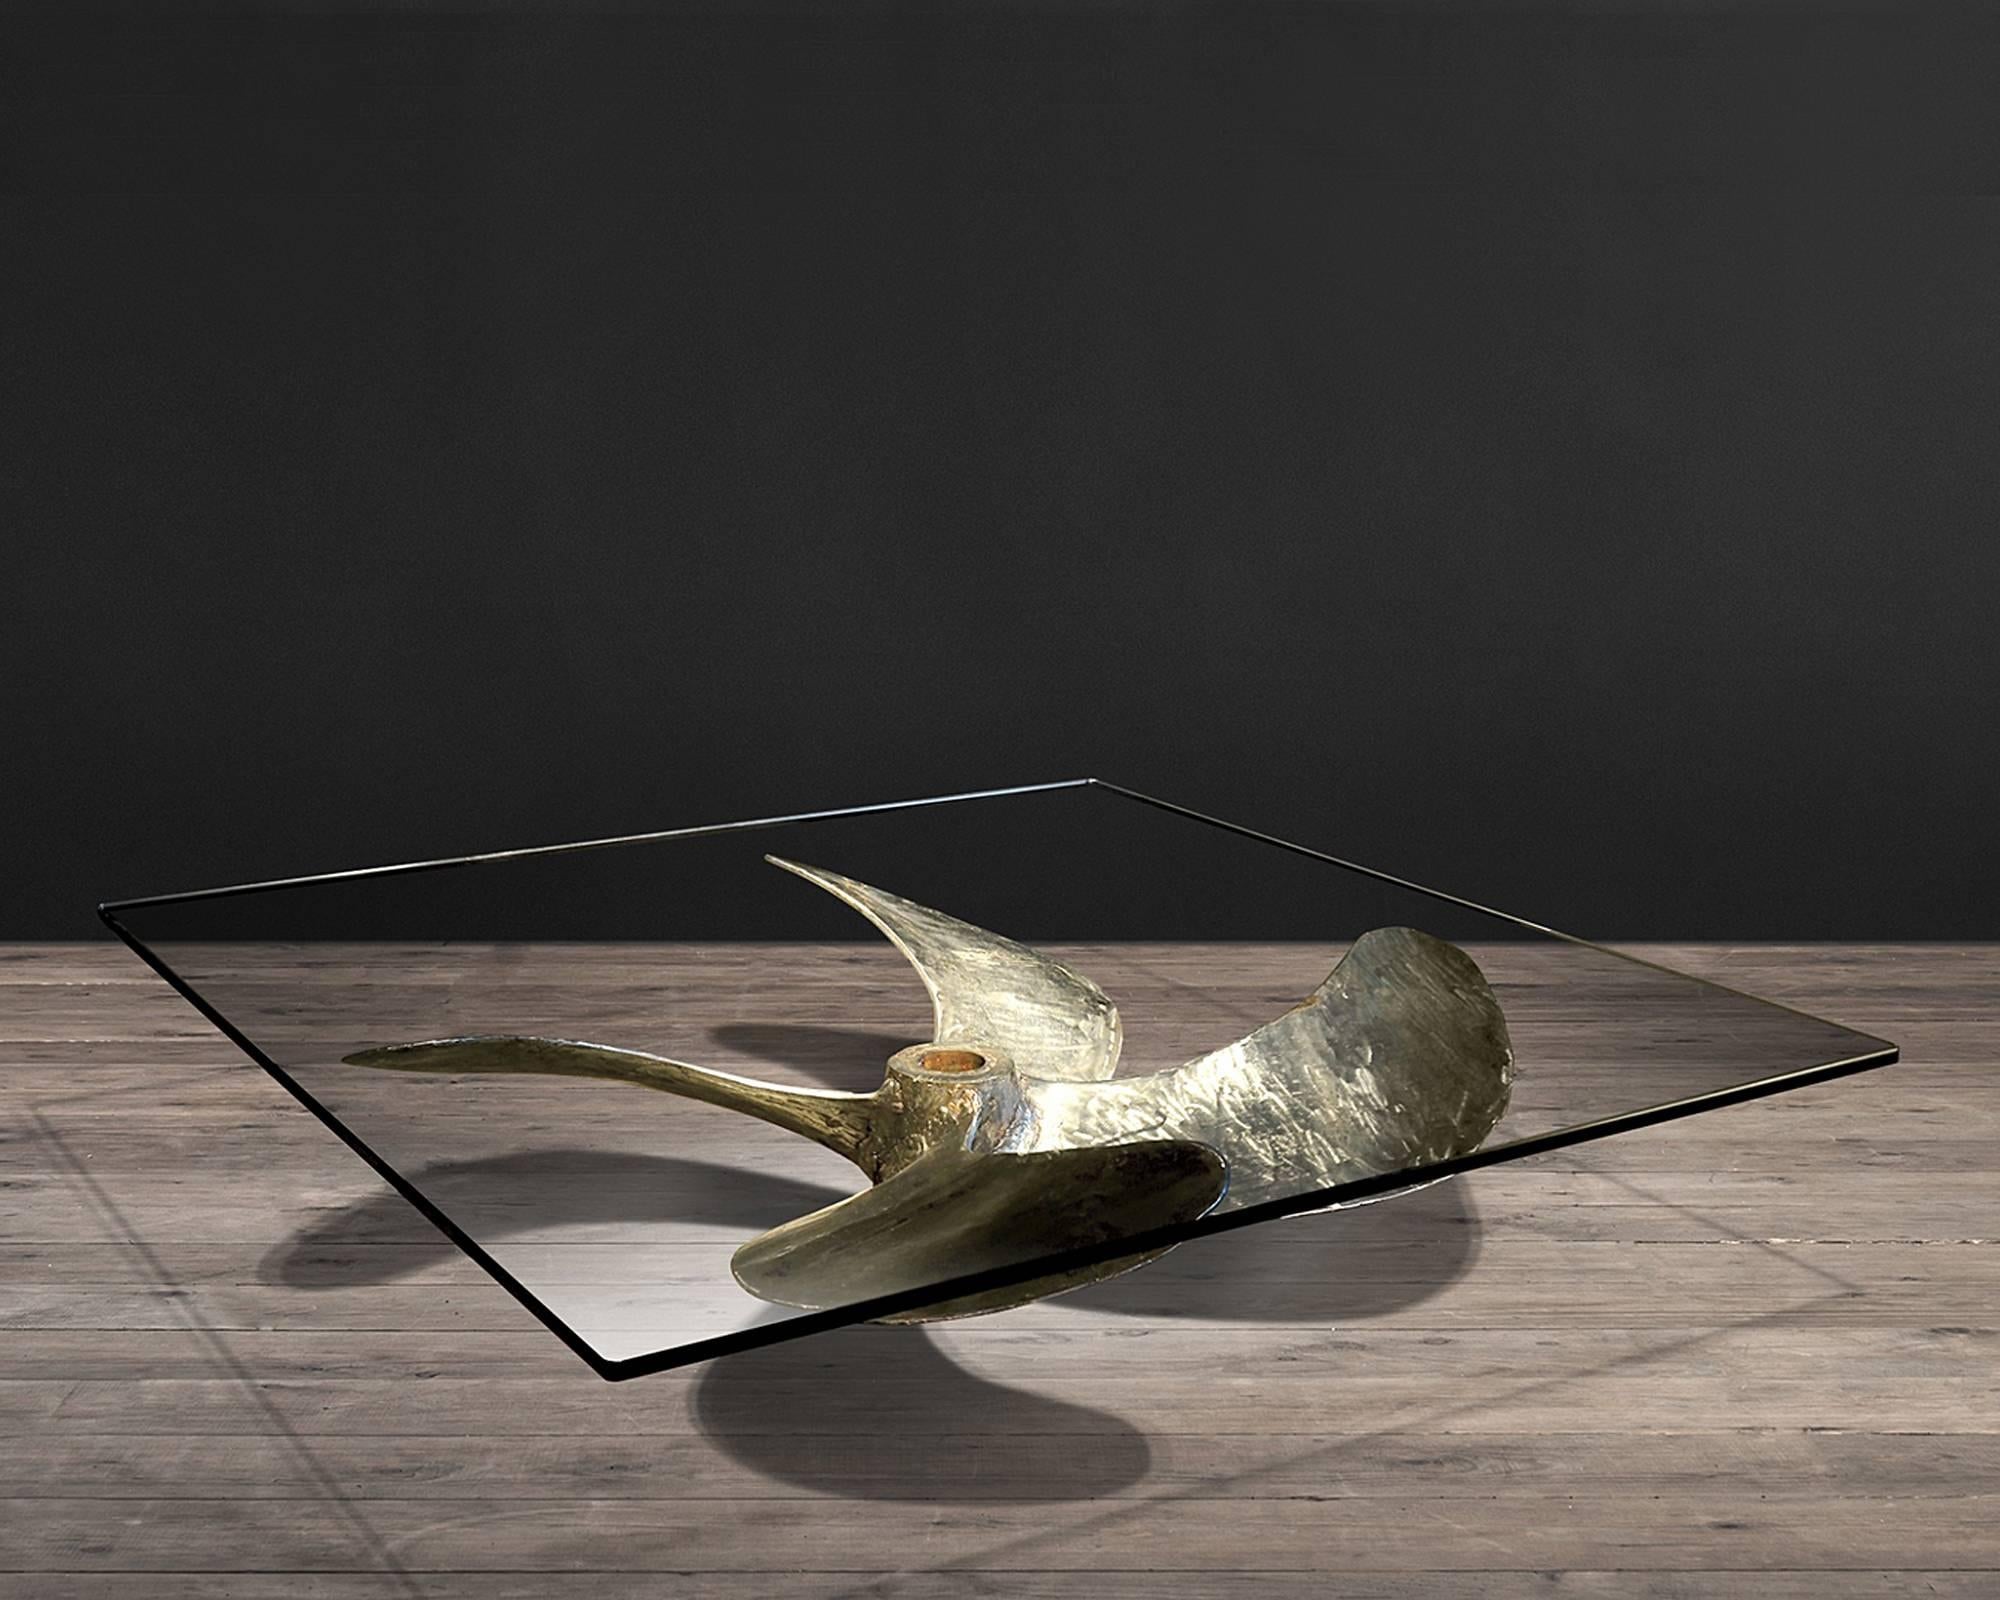 Coffee table Propeller is handcrafted from the
propellers of Chinese fishing junks, simple pane
glass top.
